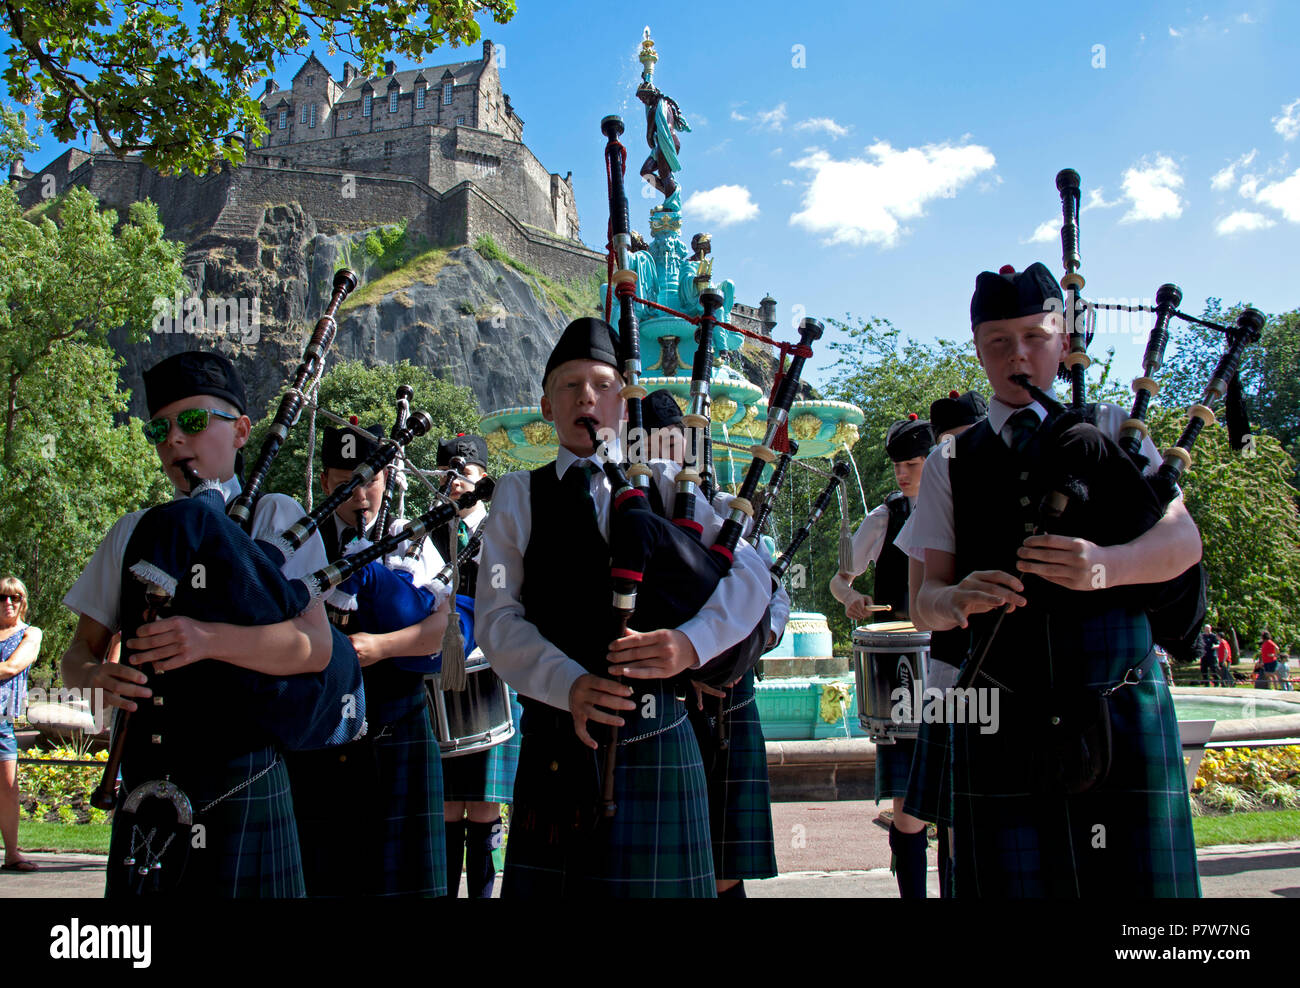 Edinburgh, Scotland, UK. 8 July 2018. Ross Fountain, West Princes Street Gardens switch on day, crowds of families and tourists flock in the sunshine to see Edinburgh School's pipe band and bathe in the fountain water which was switched off in 2010. Stock Photo